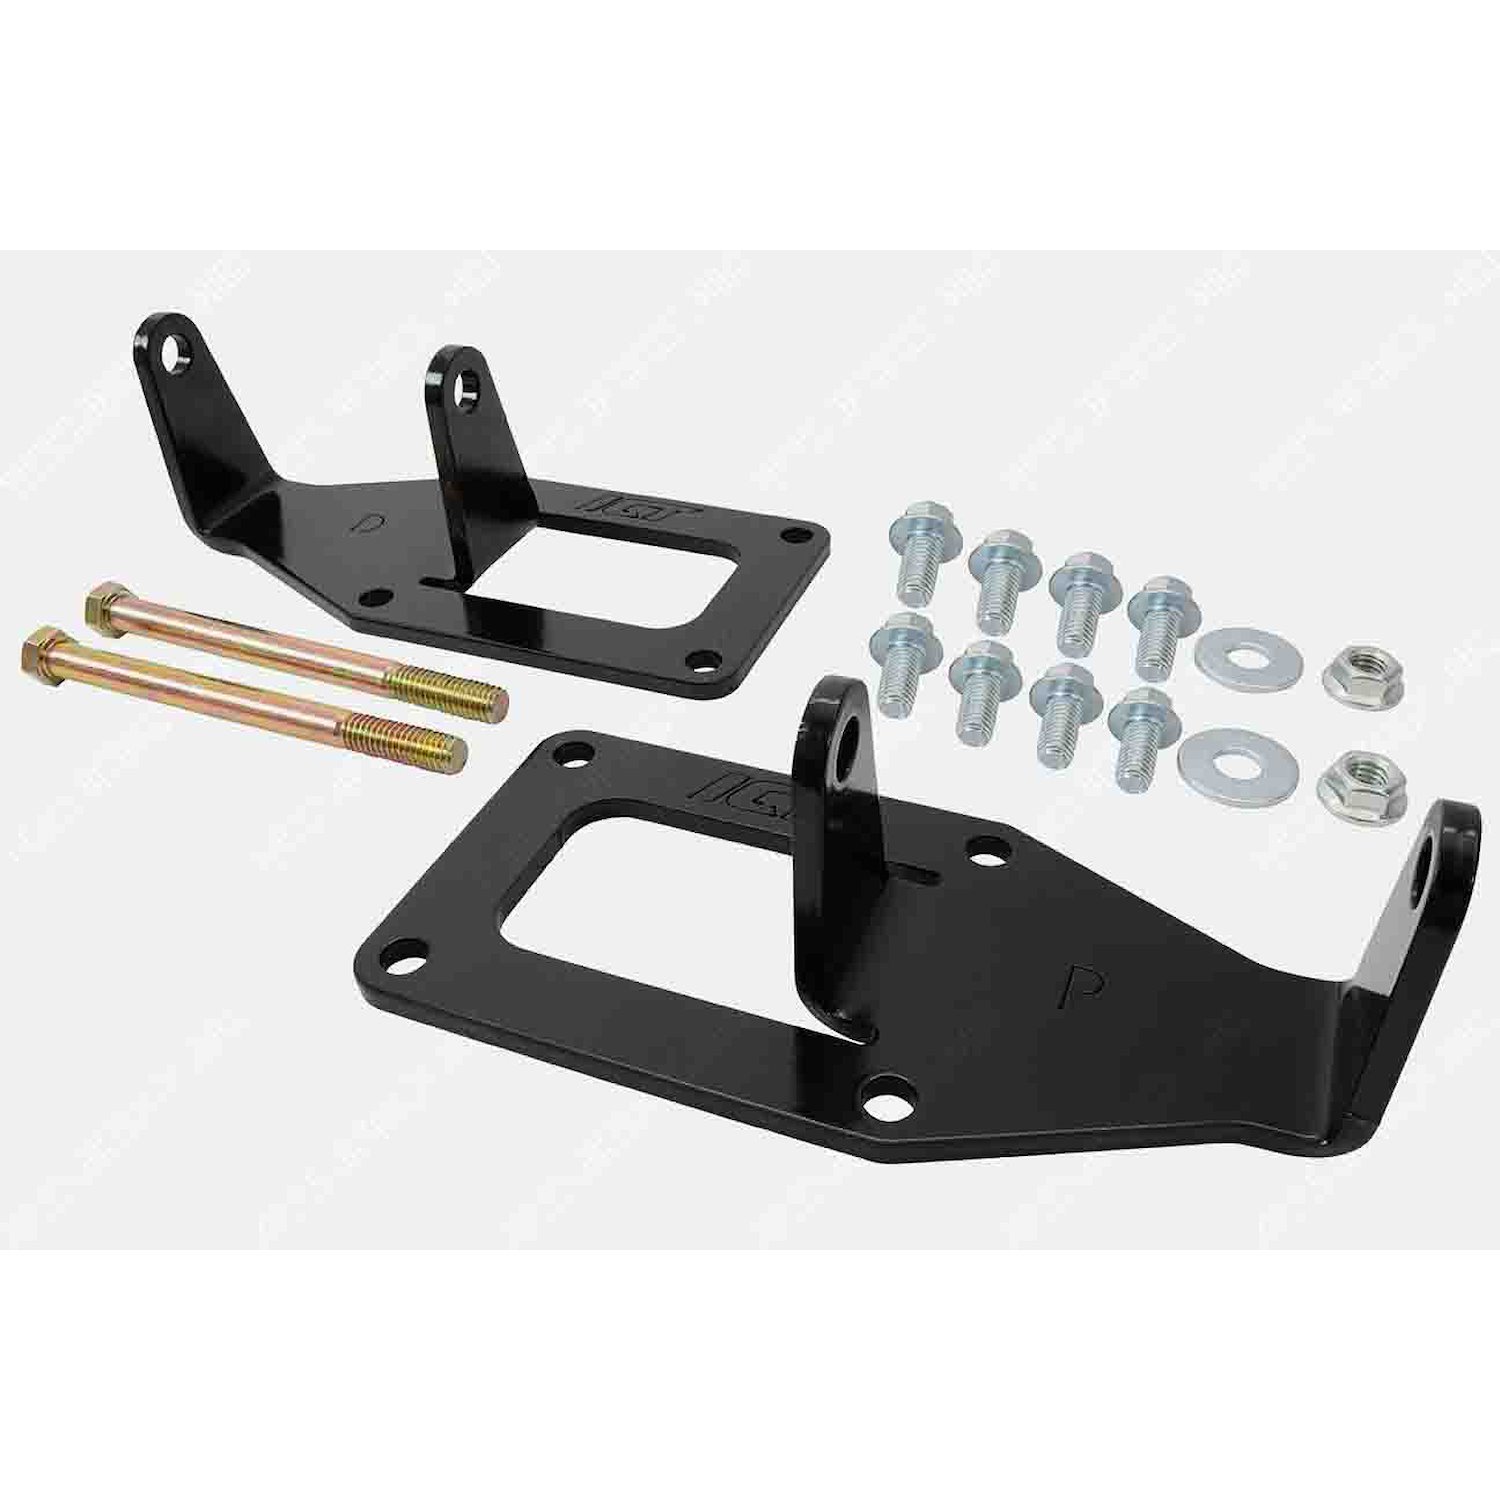 Engine Swap Mount Brackets for GM LS Engine [Clamshell Small Block Chevy Mounts]